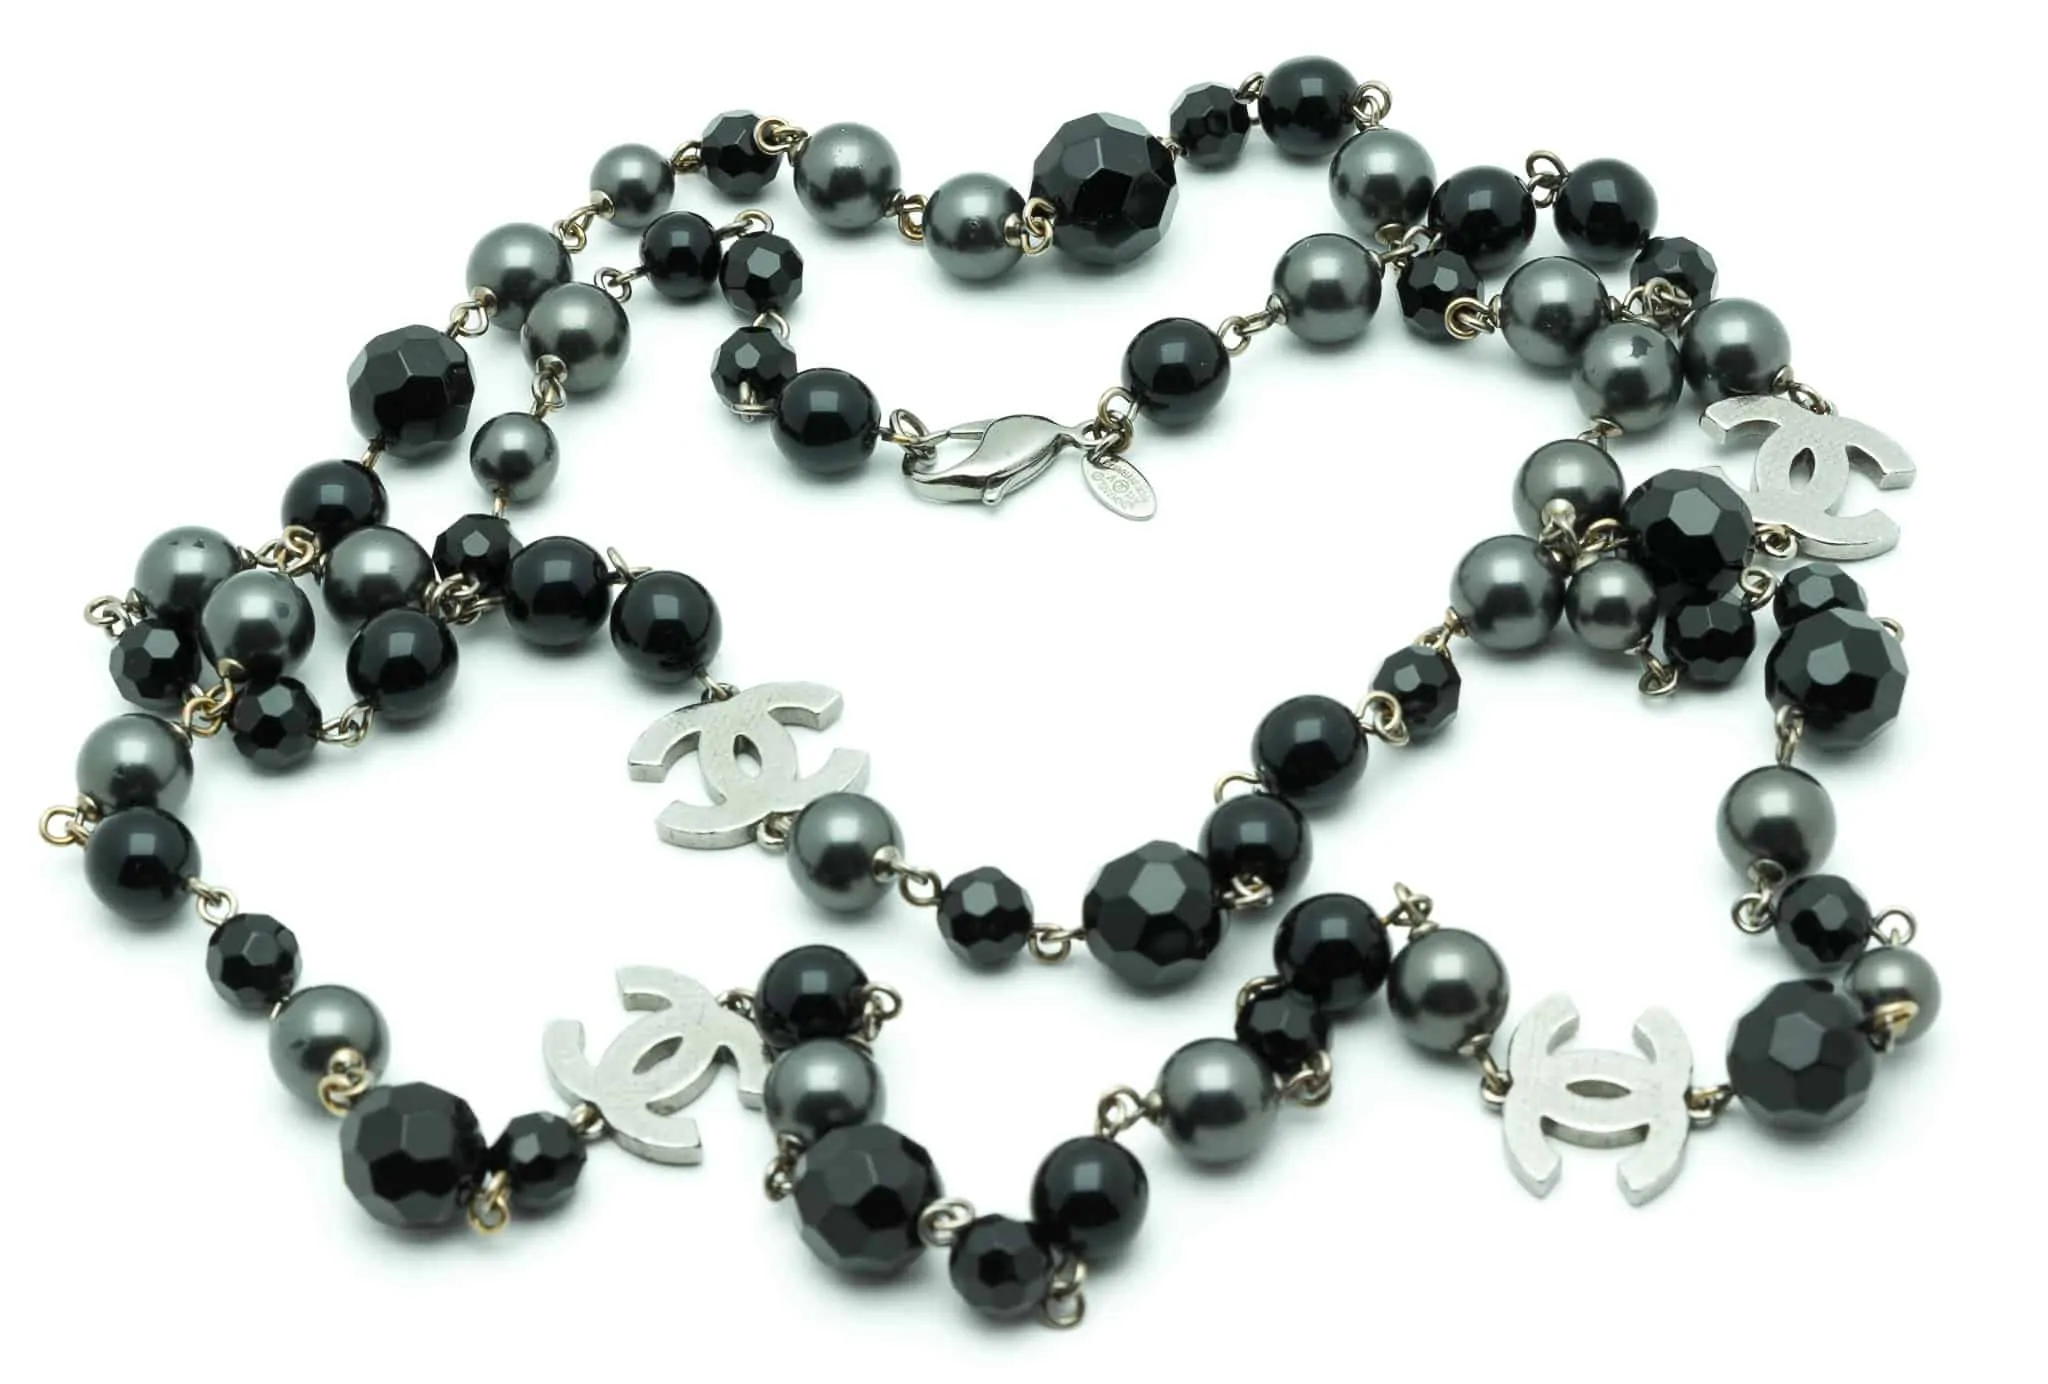 Reserved - Chanel Black Necklace Grey Pearls 2011 - Katheley's